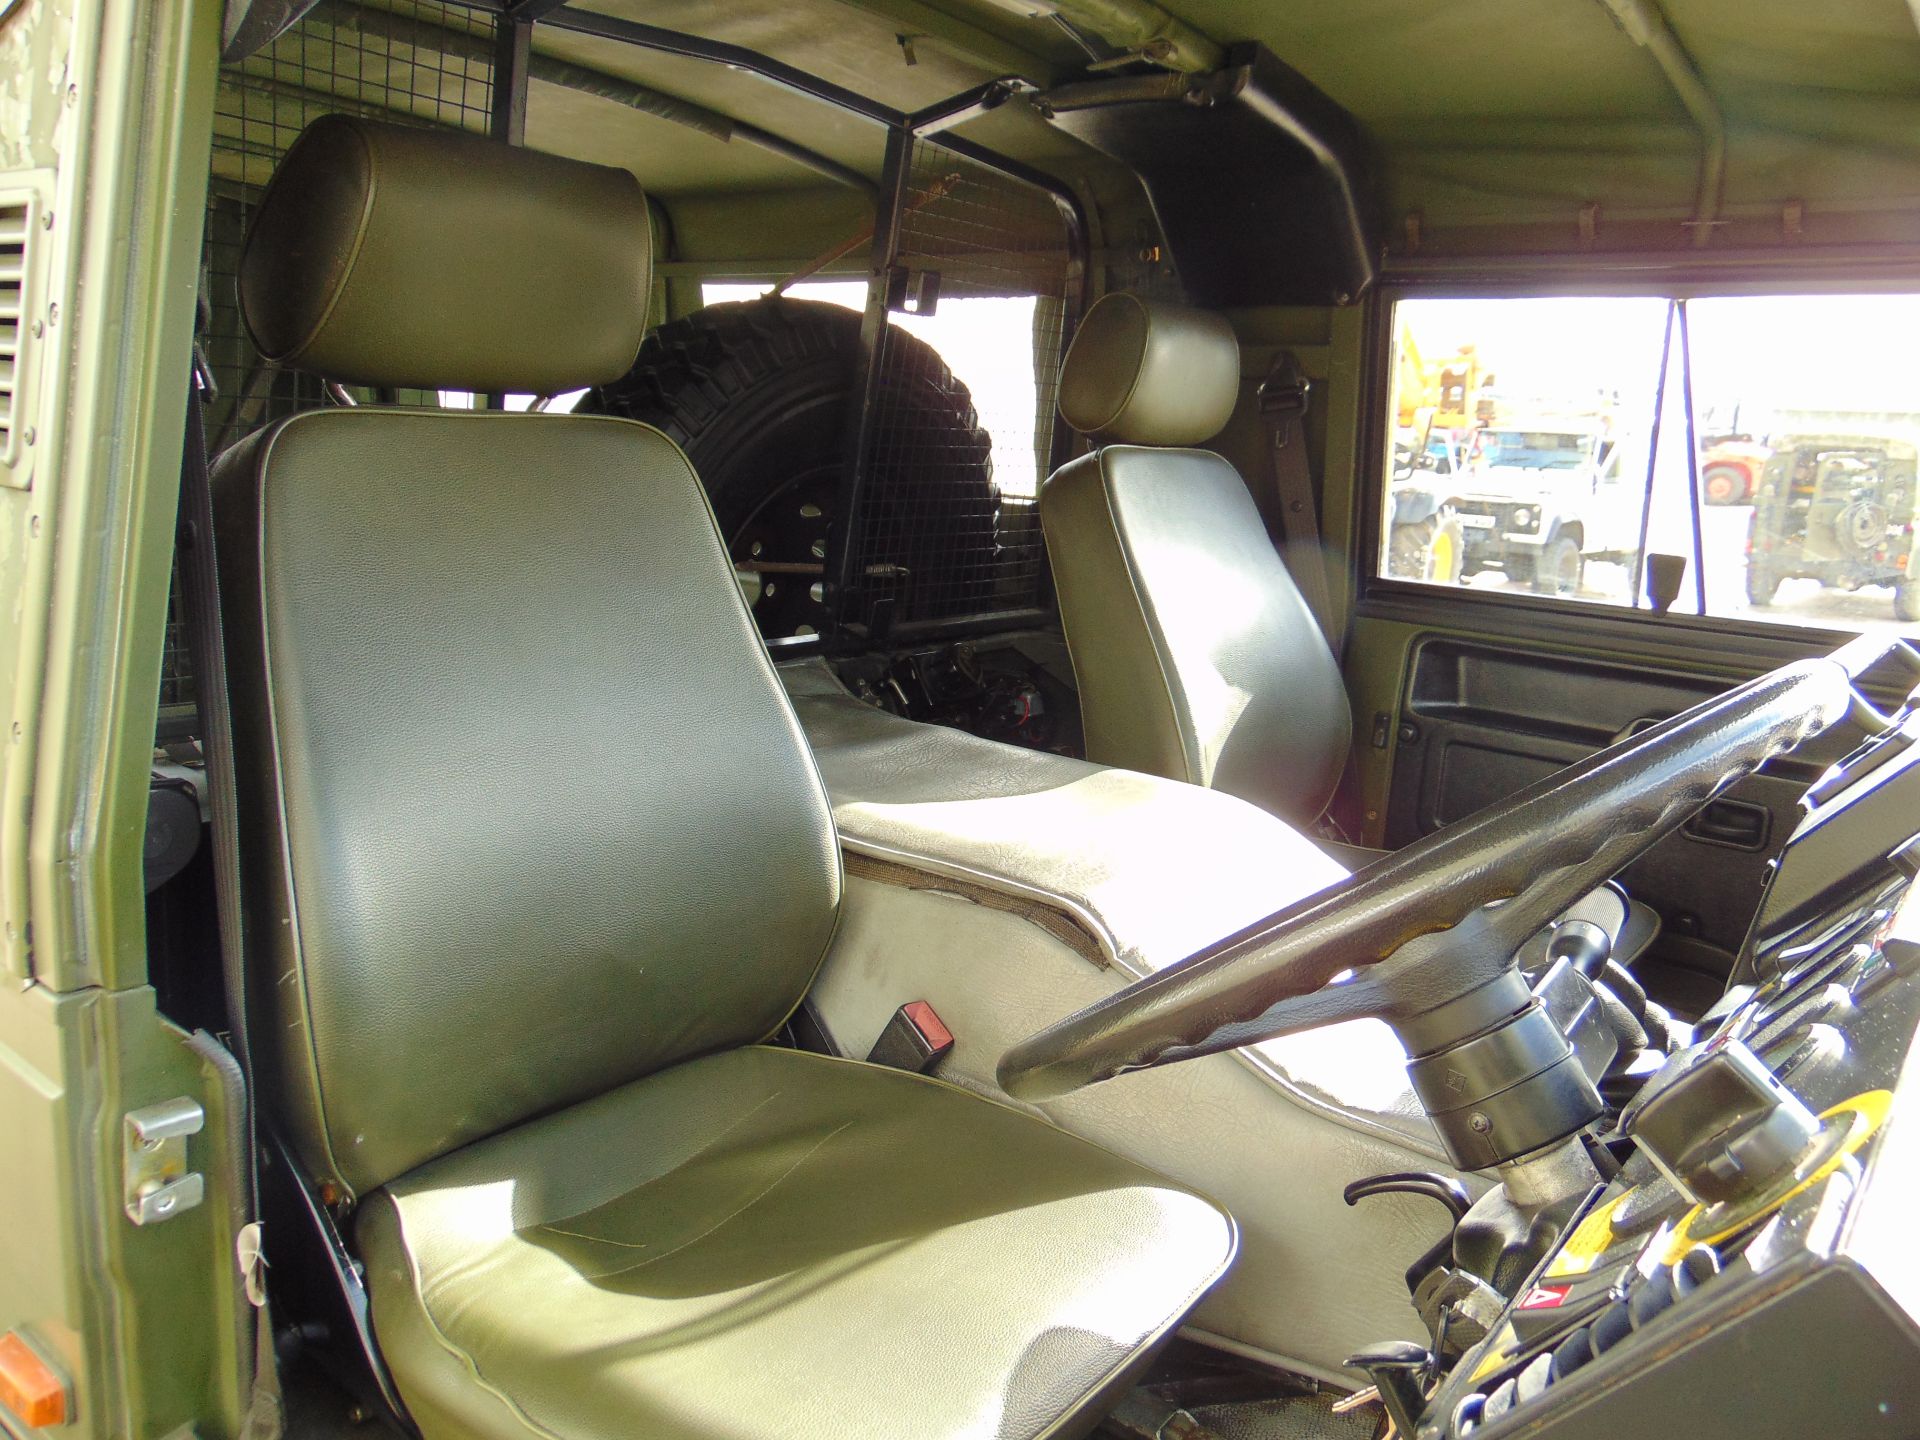 Pinzgauer 716 RHD soft top - only 7235 recorded miles! - Image 13 of 61